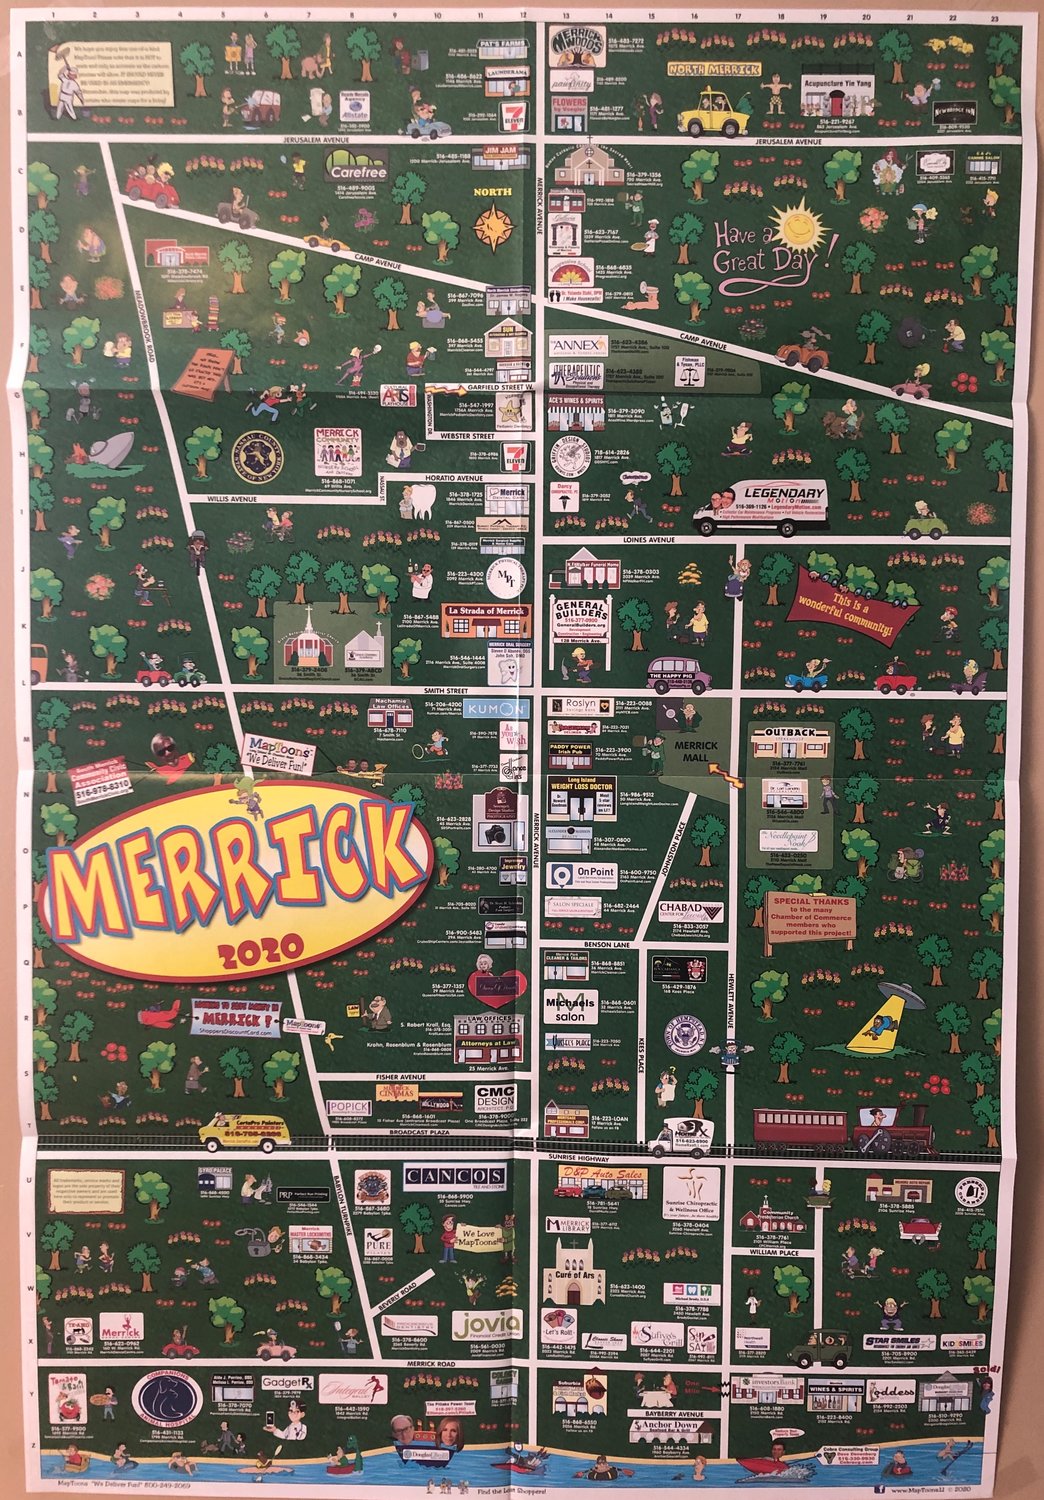 MapToons’ 2020 iteration of Merrick’s business community features fun cartoons and superimposed images of local business owners and community leaders.